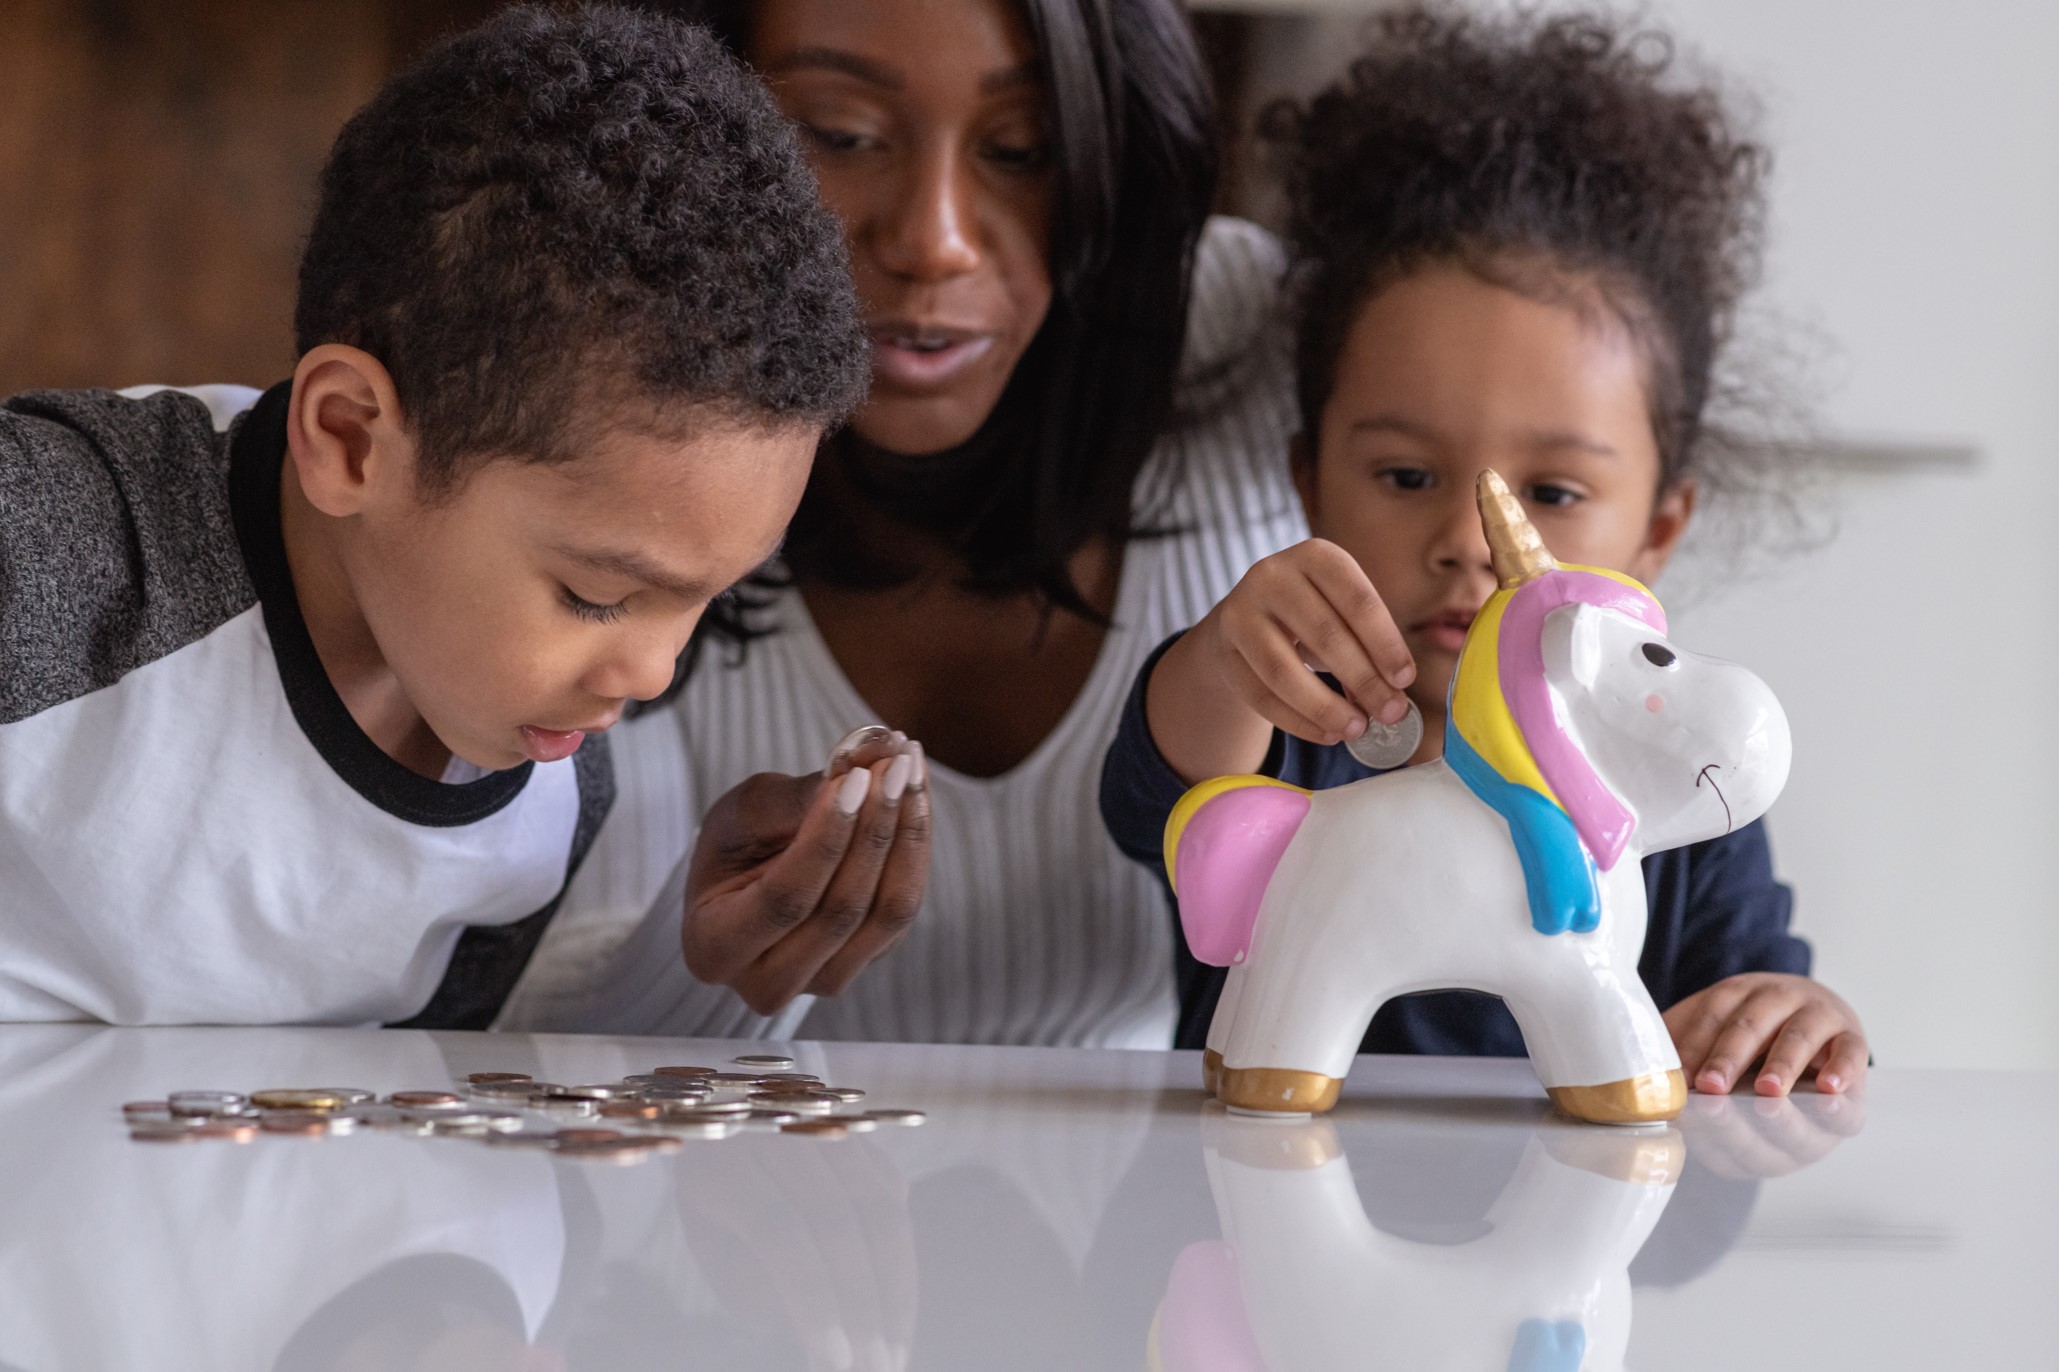 mom with young daughter and son putting coins in a unicorn shaped piggy bank